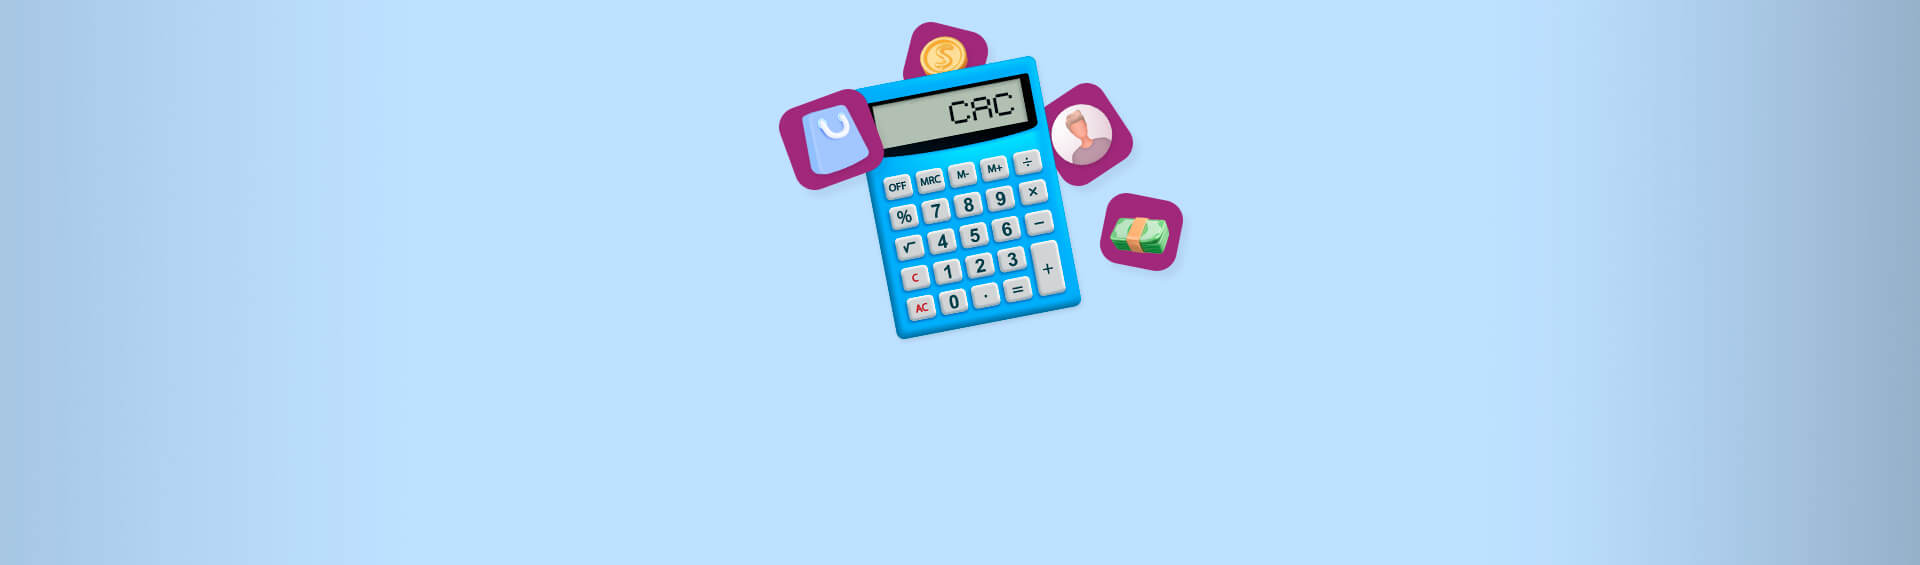 Customer Acquisition Cost (CAC) Calculator. Estimate How Much It Costs To Acquire One Customer